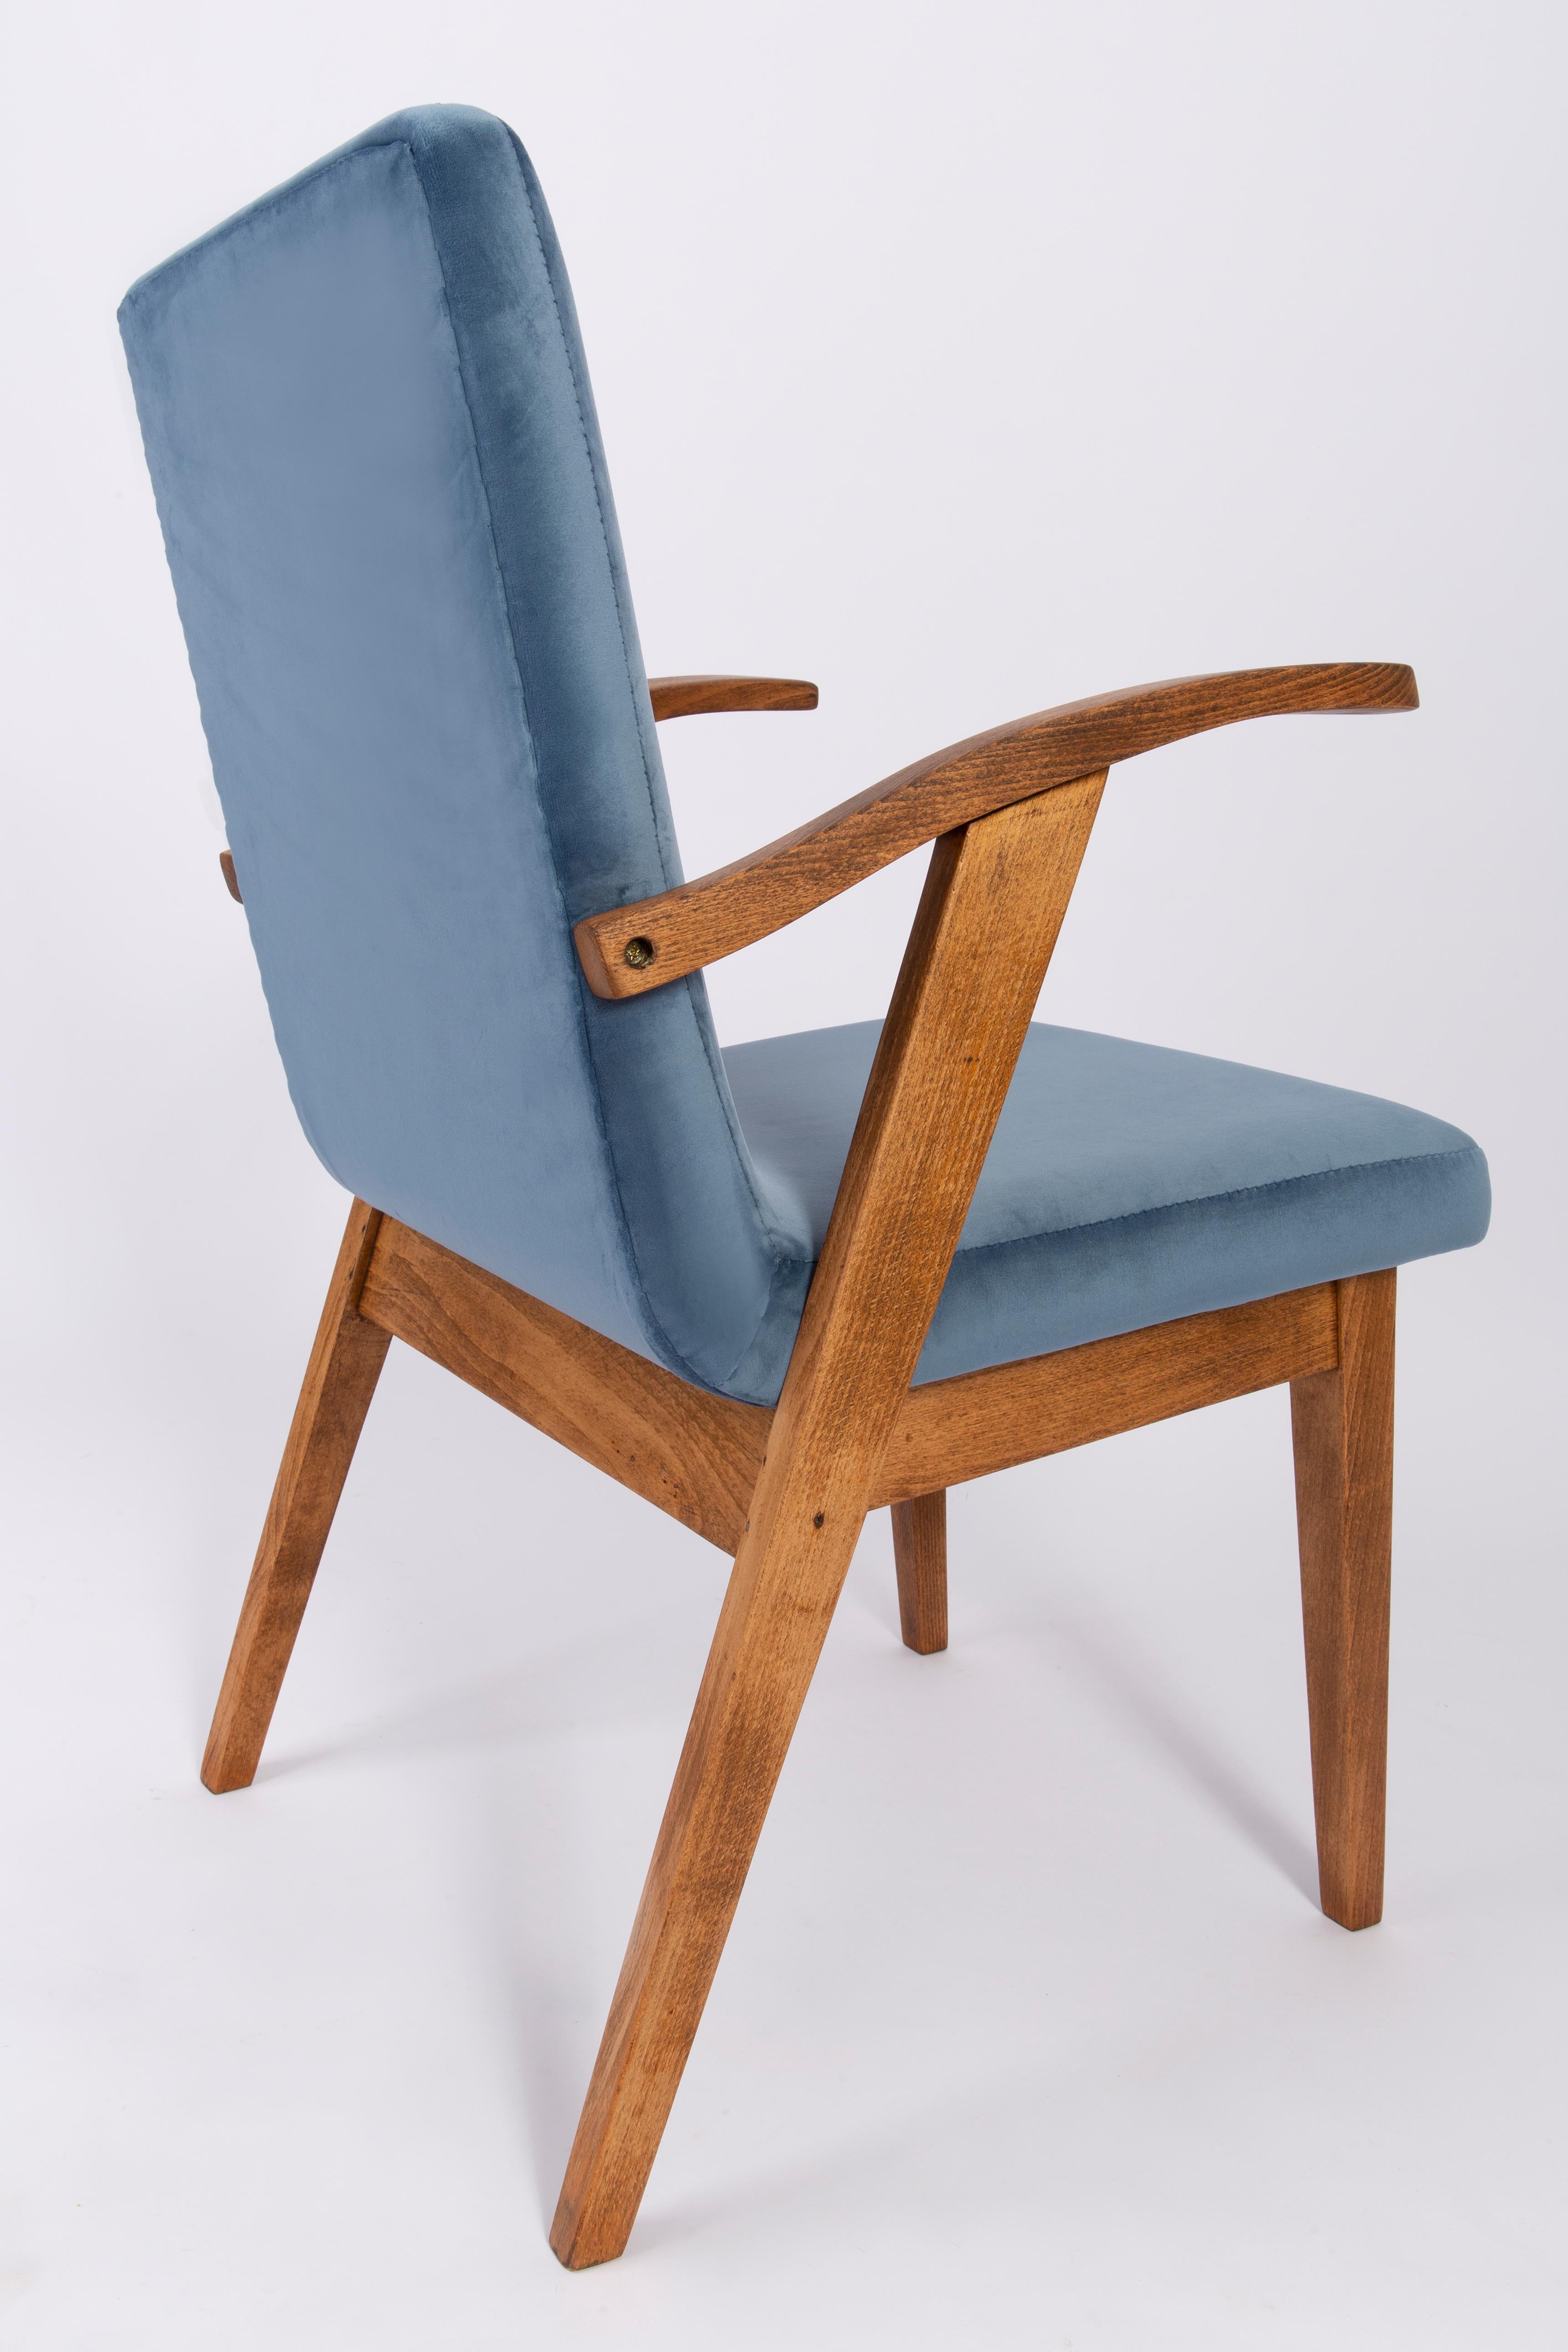 Set of Six 20th Century Vintage Blue Chairs by Mieczyslaw Puchala, 1960s For Sale 3